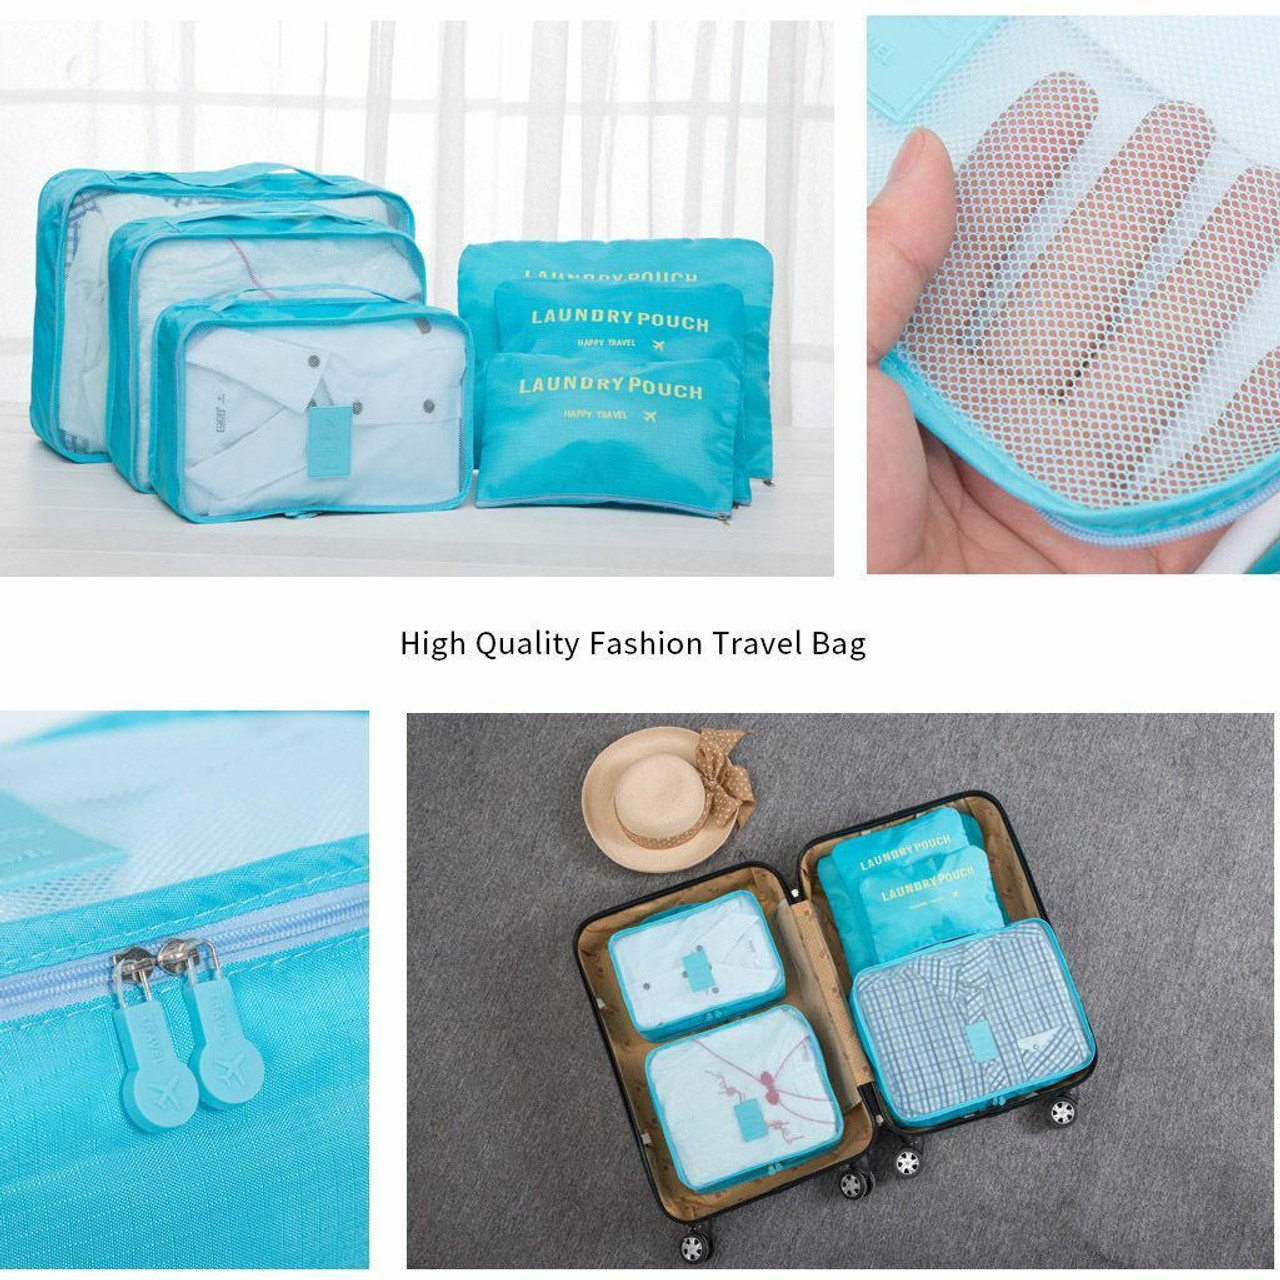 https://cdn11.bigcommerce.com/s-zrh8tkpr8d/images/stencil/1280x1280/products/9963/32594/6pcsset-travel-storage-bag-for-clothes-luggage-packing-cube-organizer-suitcase__96450.1702314515.jpg?c=2&imbypass=on